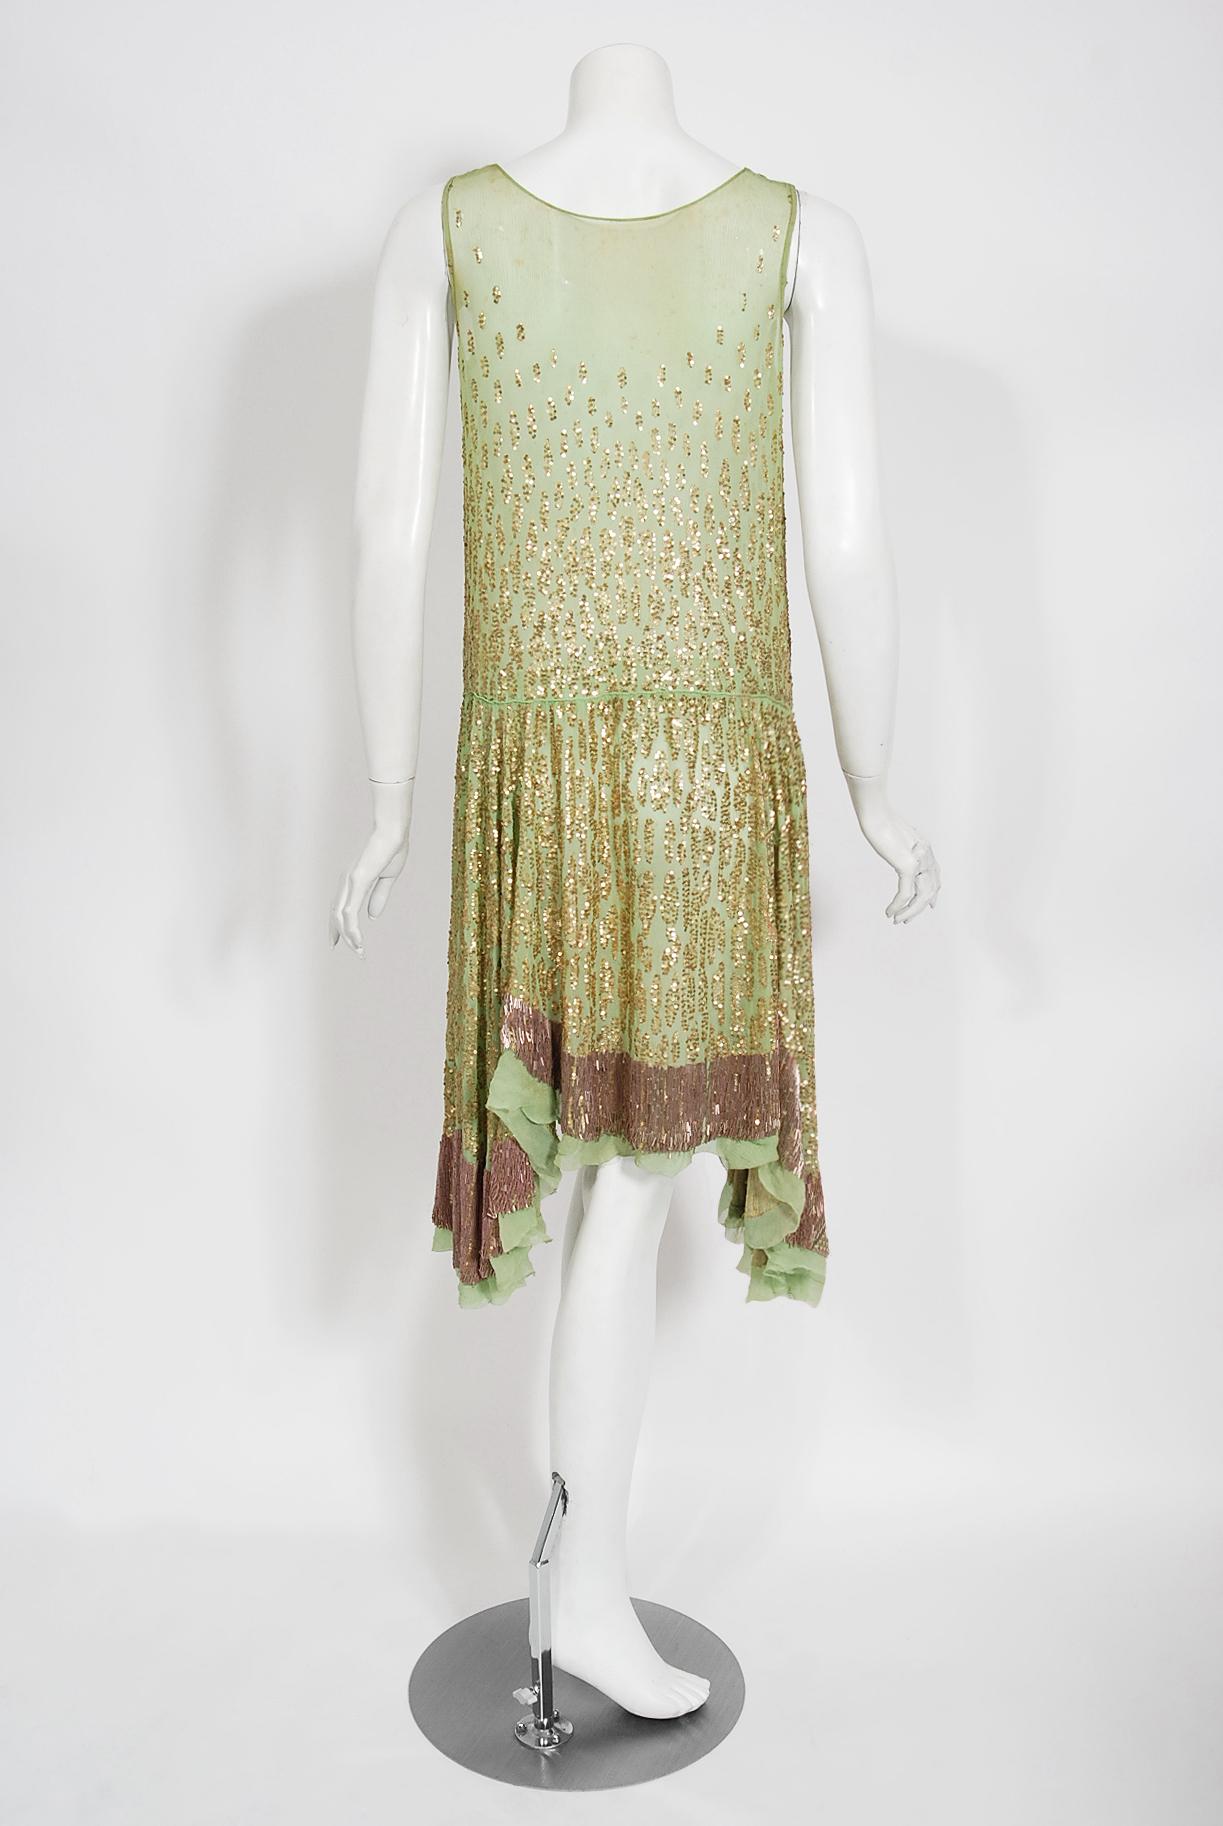 Vintage 1920's French Mint-Green Beaded Sequin Silk Chiffon Draped Flapper Dress For Sale 4